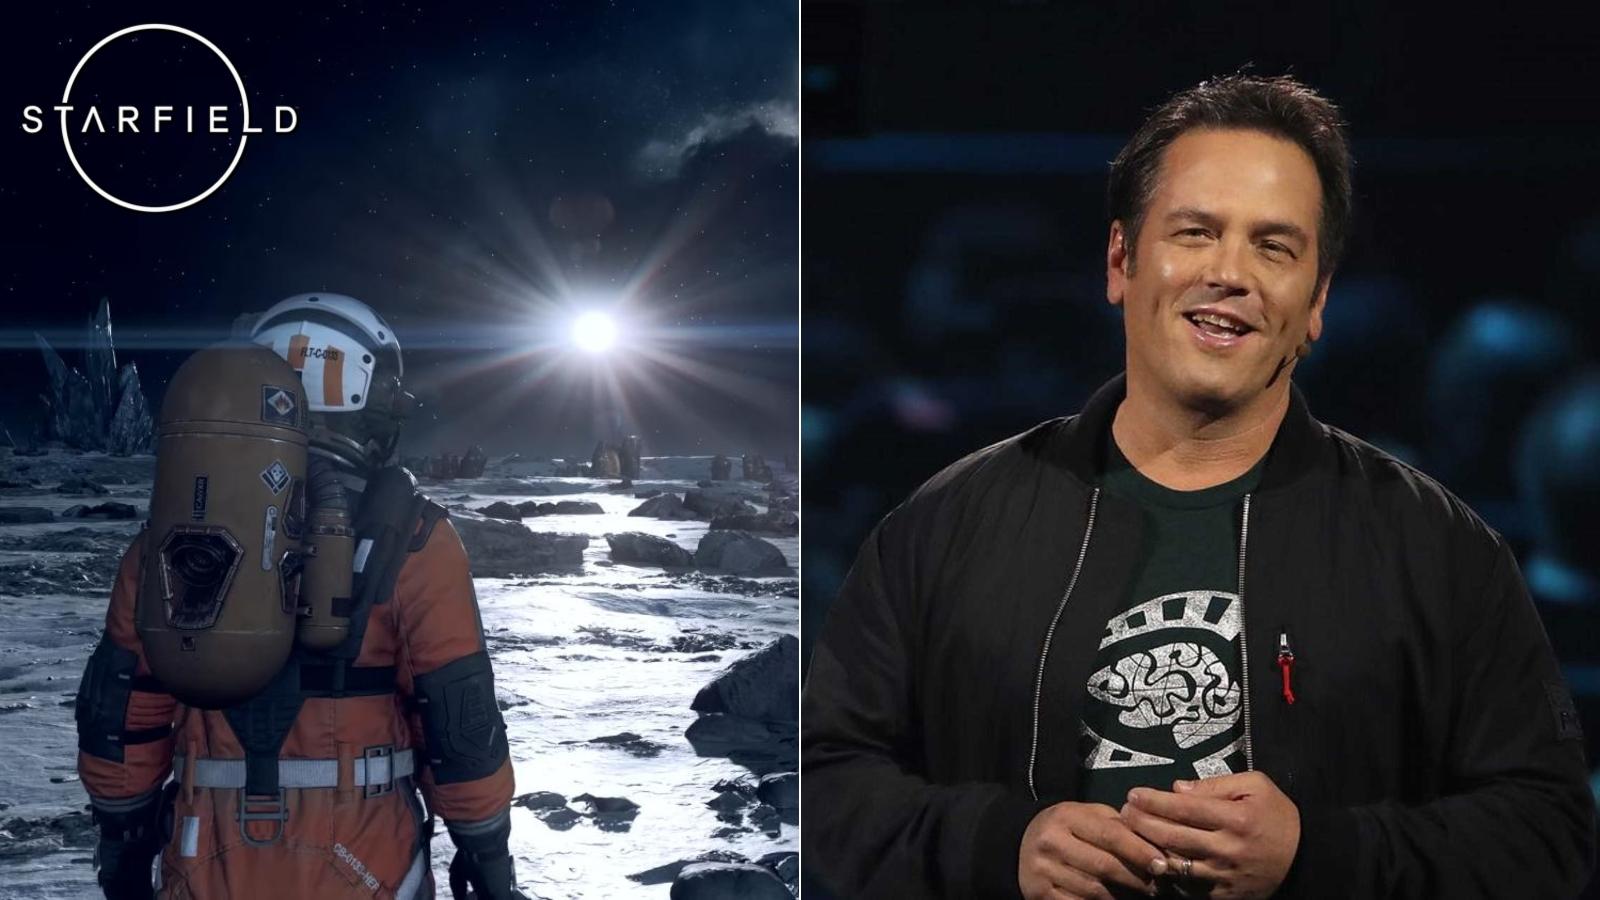 Starfield will have a long life - Xbox head Phil Spencer stated